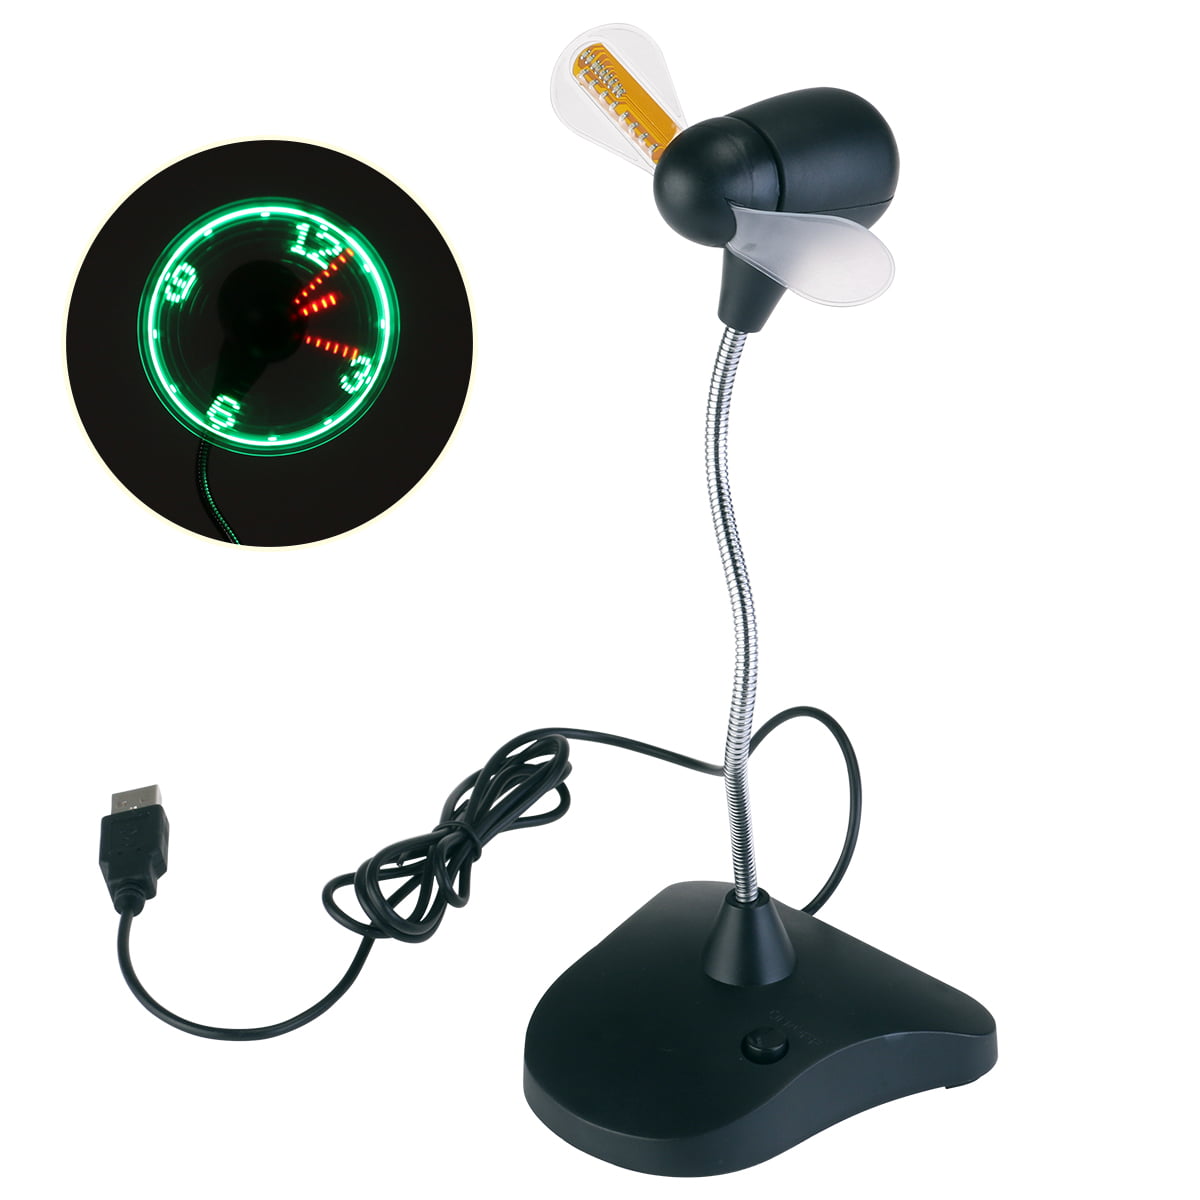 LED LIGHTED flexible USB POWER COOLING Mini FAN for Travel Laptop Computer PC